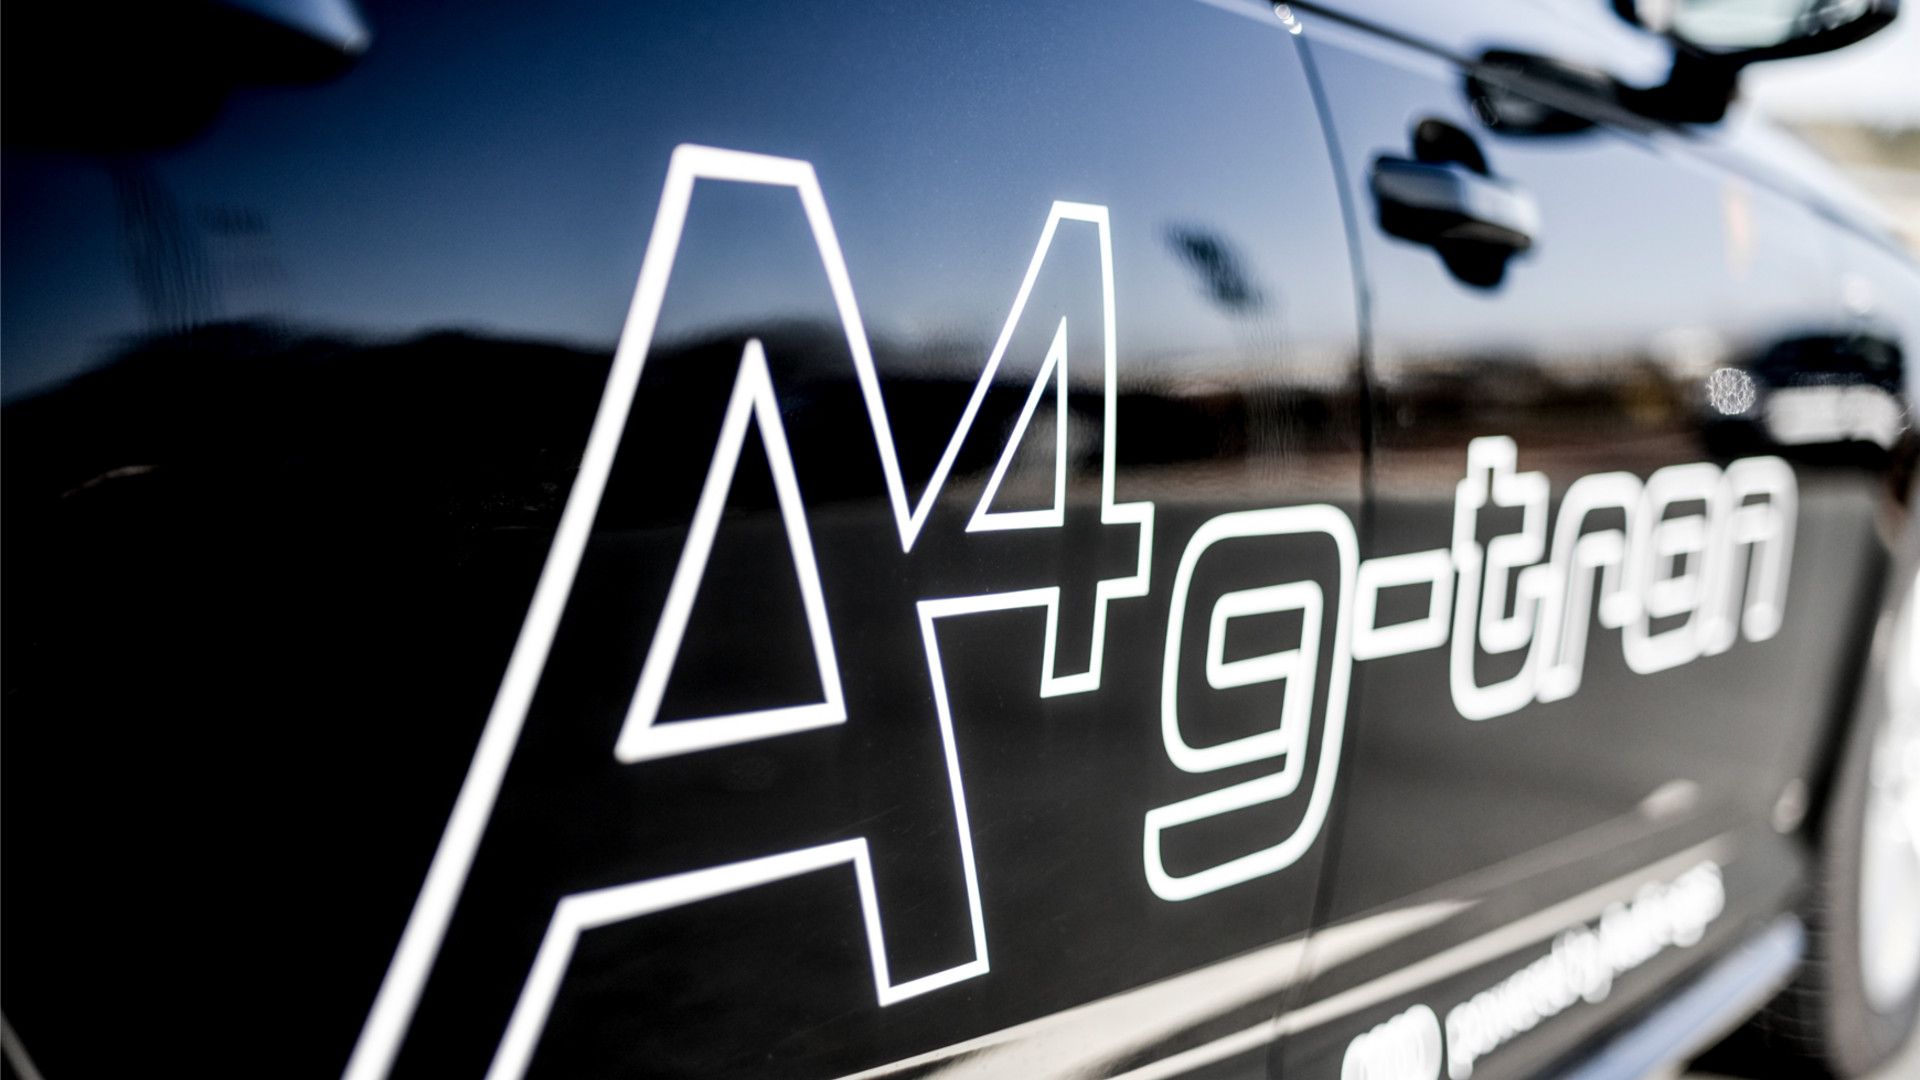 The Audi A4 Avant g-tron1 emits lower CO₂ emissions in gas mode. 